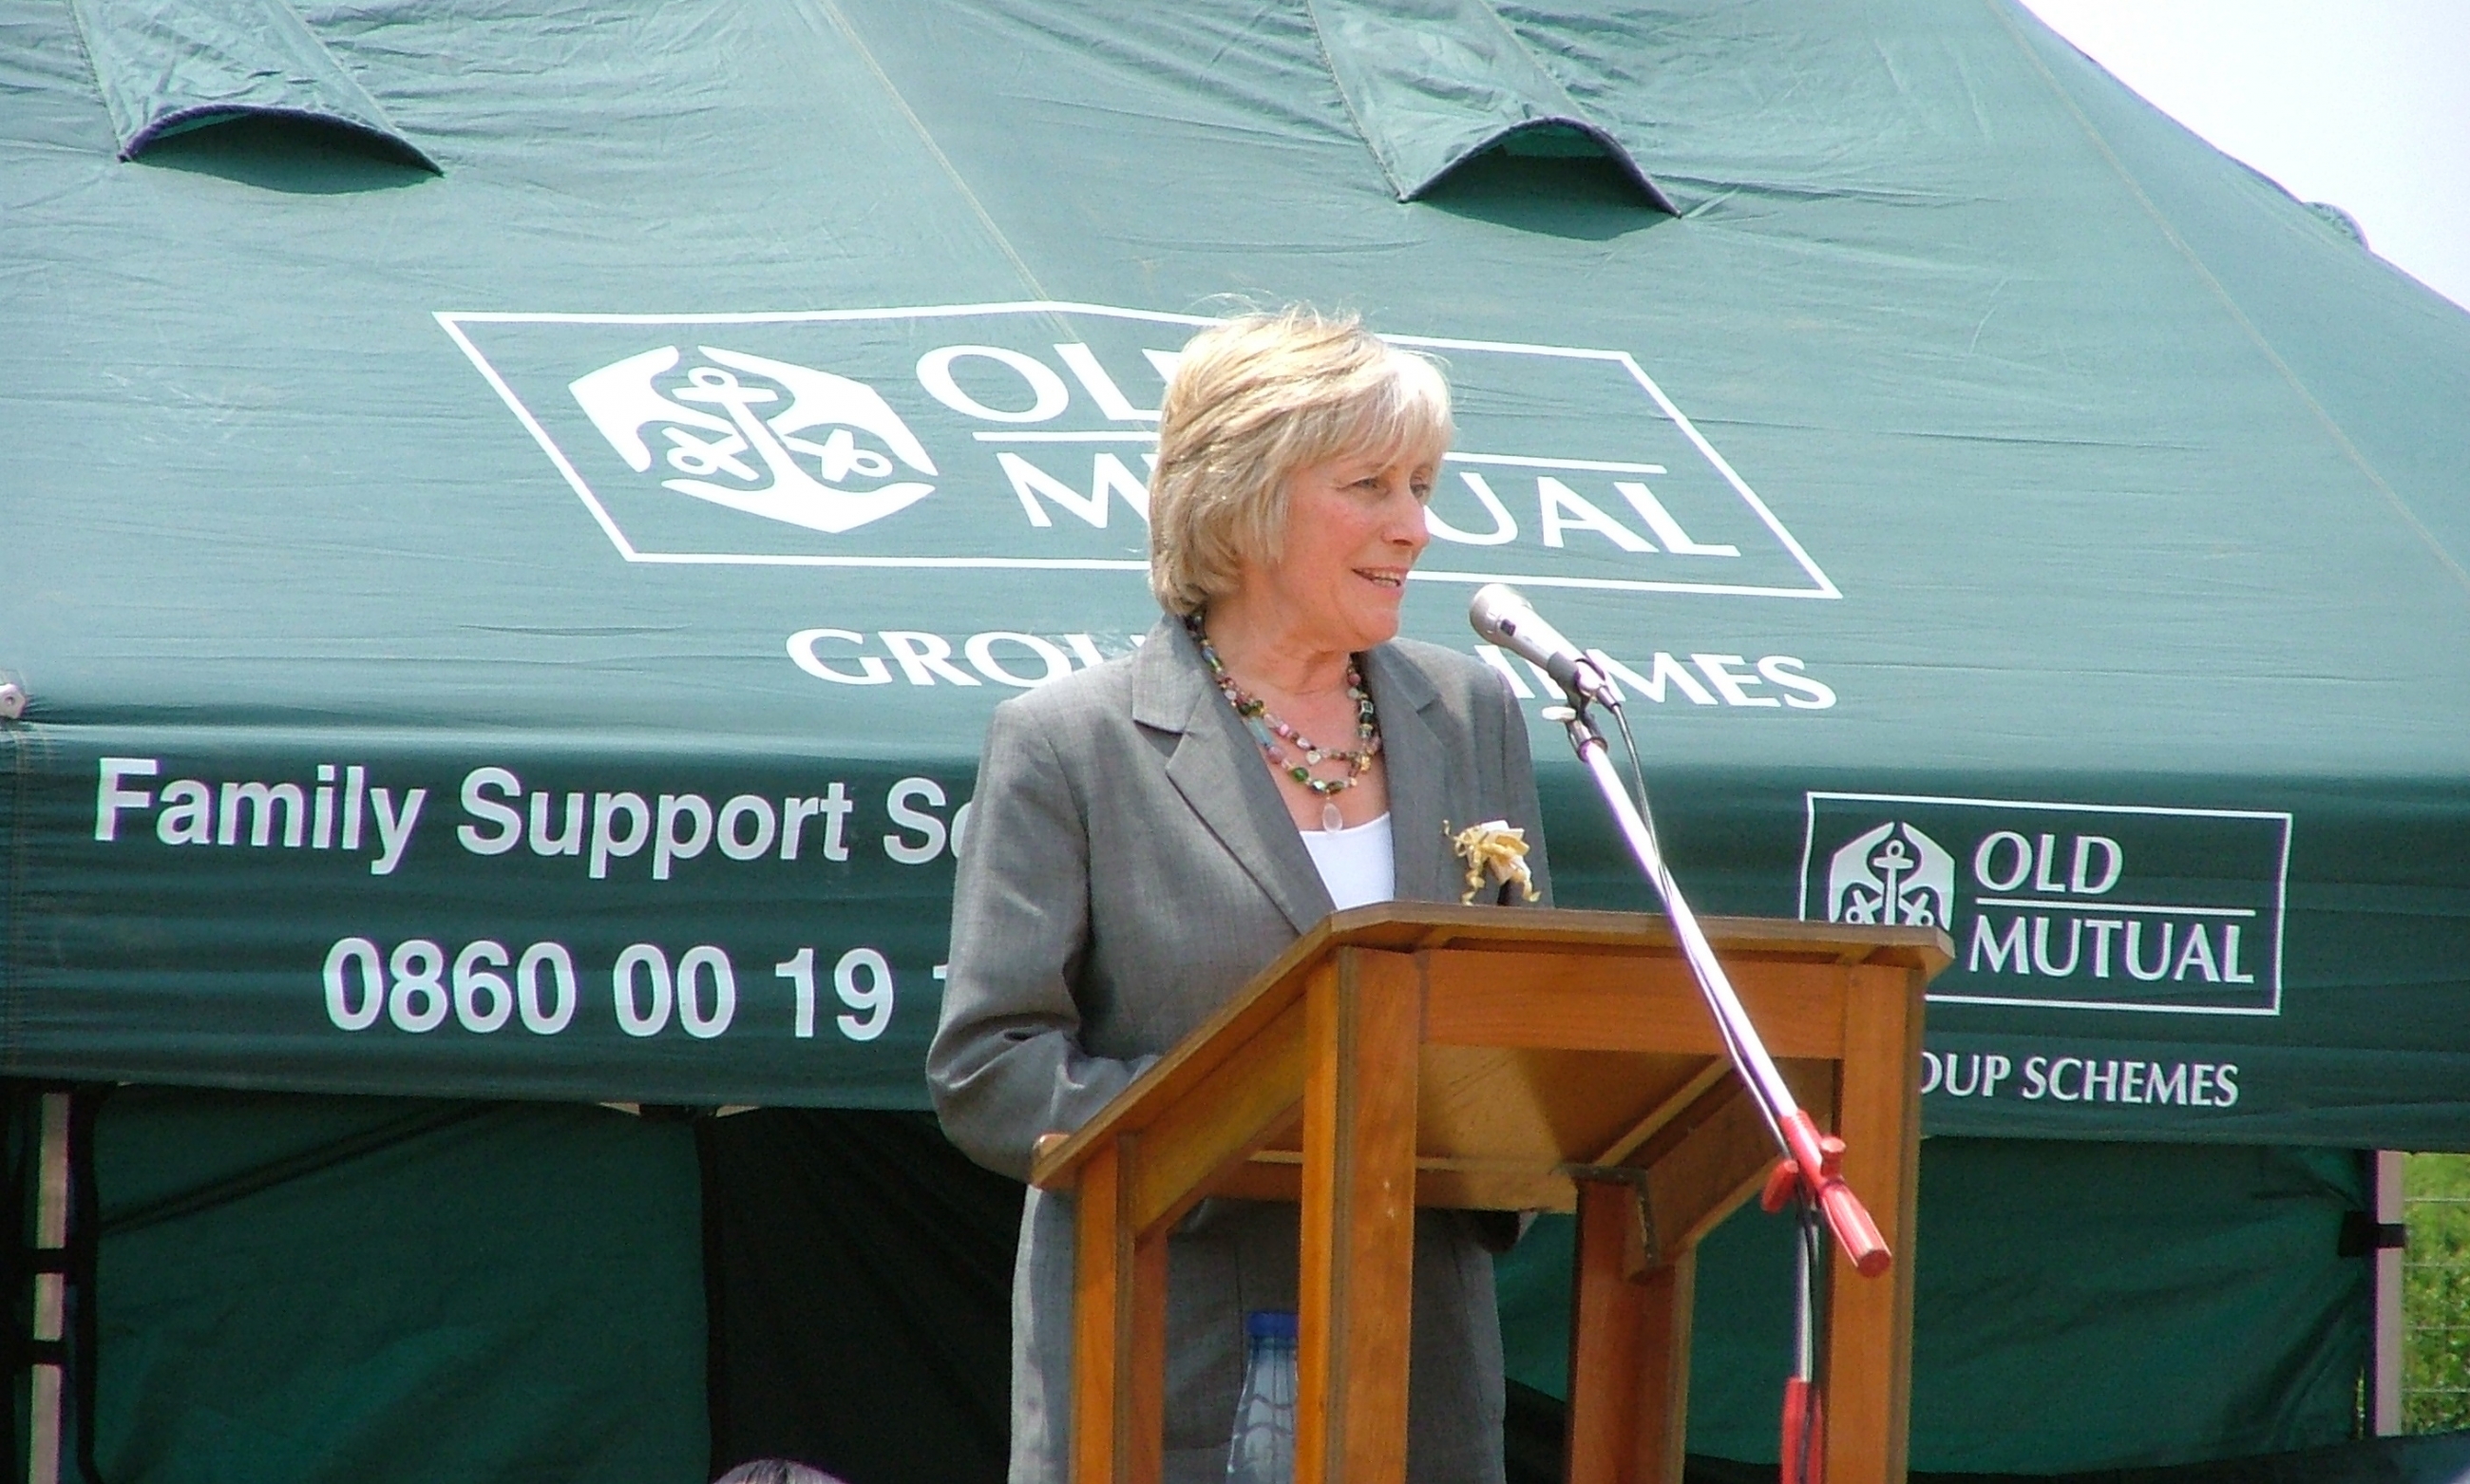 Janis Mowlam giving a speech in South Africa